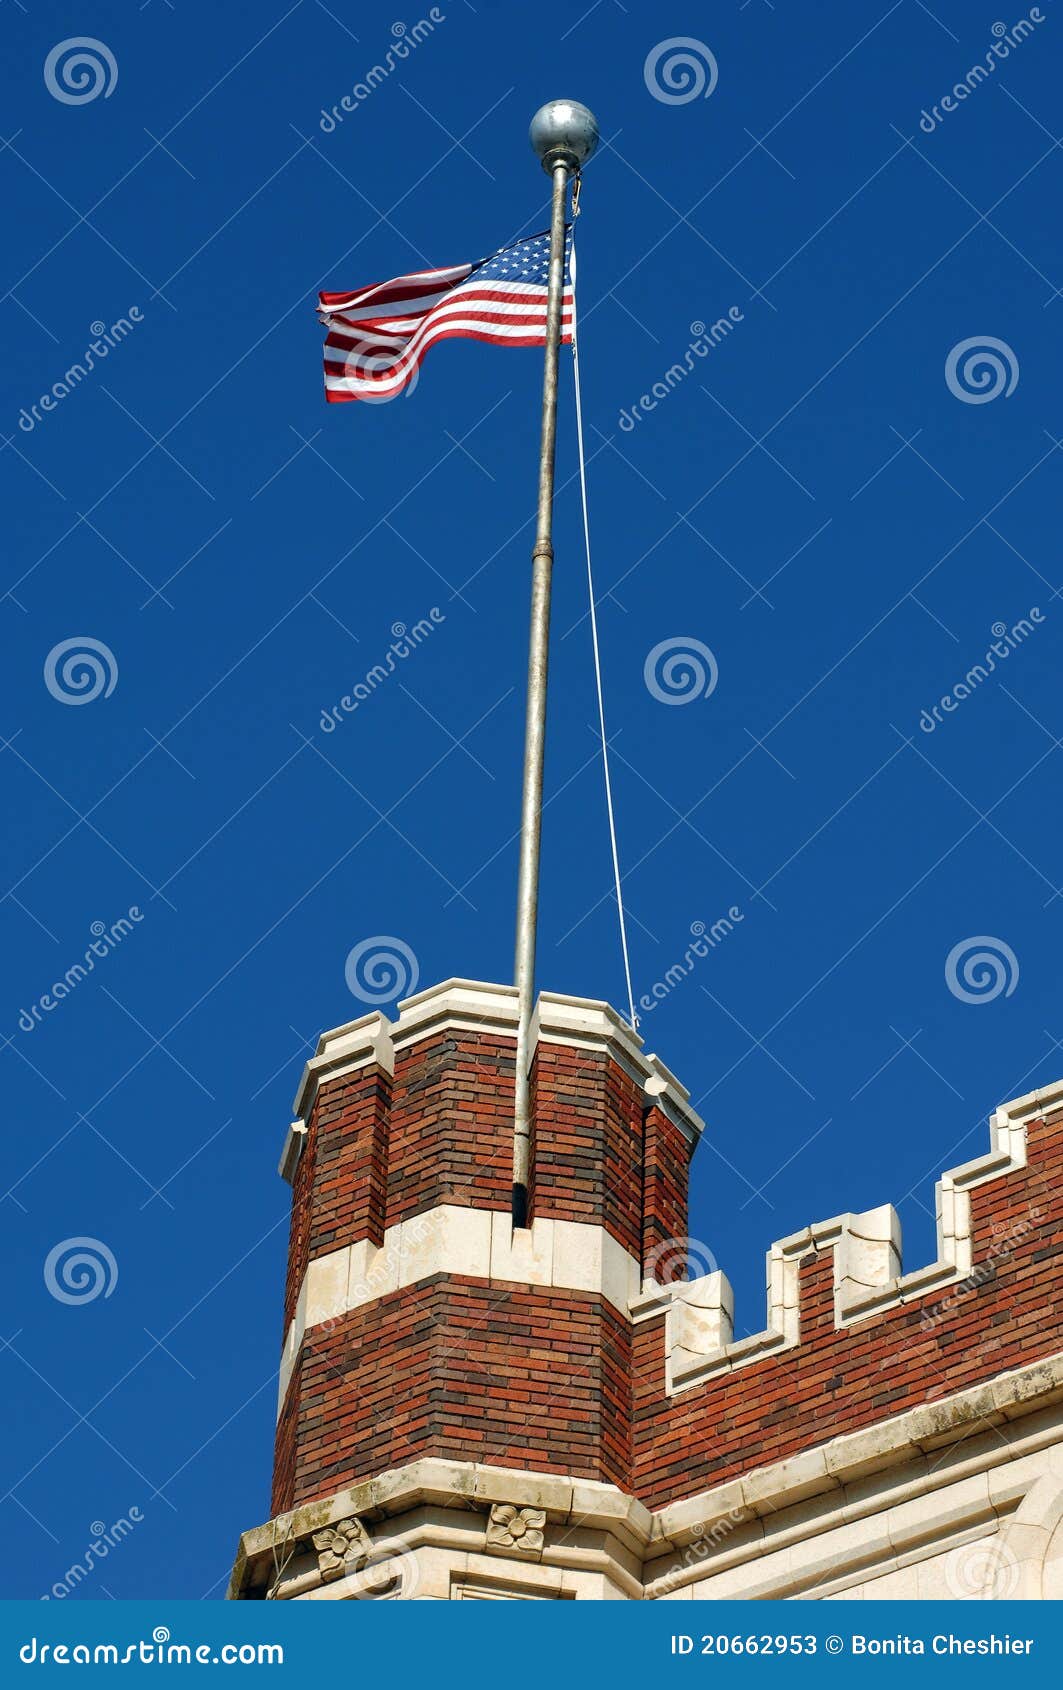 Architecture and Flag stock image. Image of front, education - 20662953